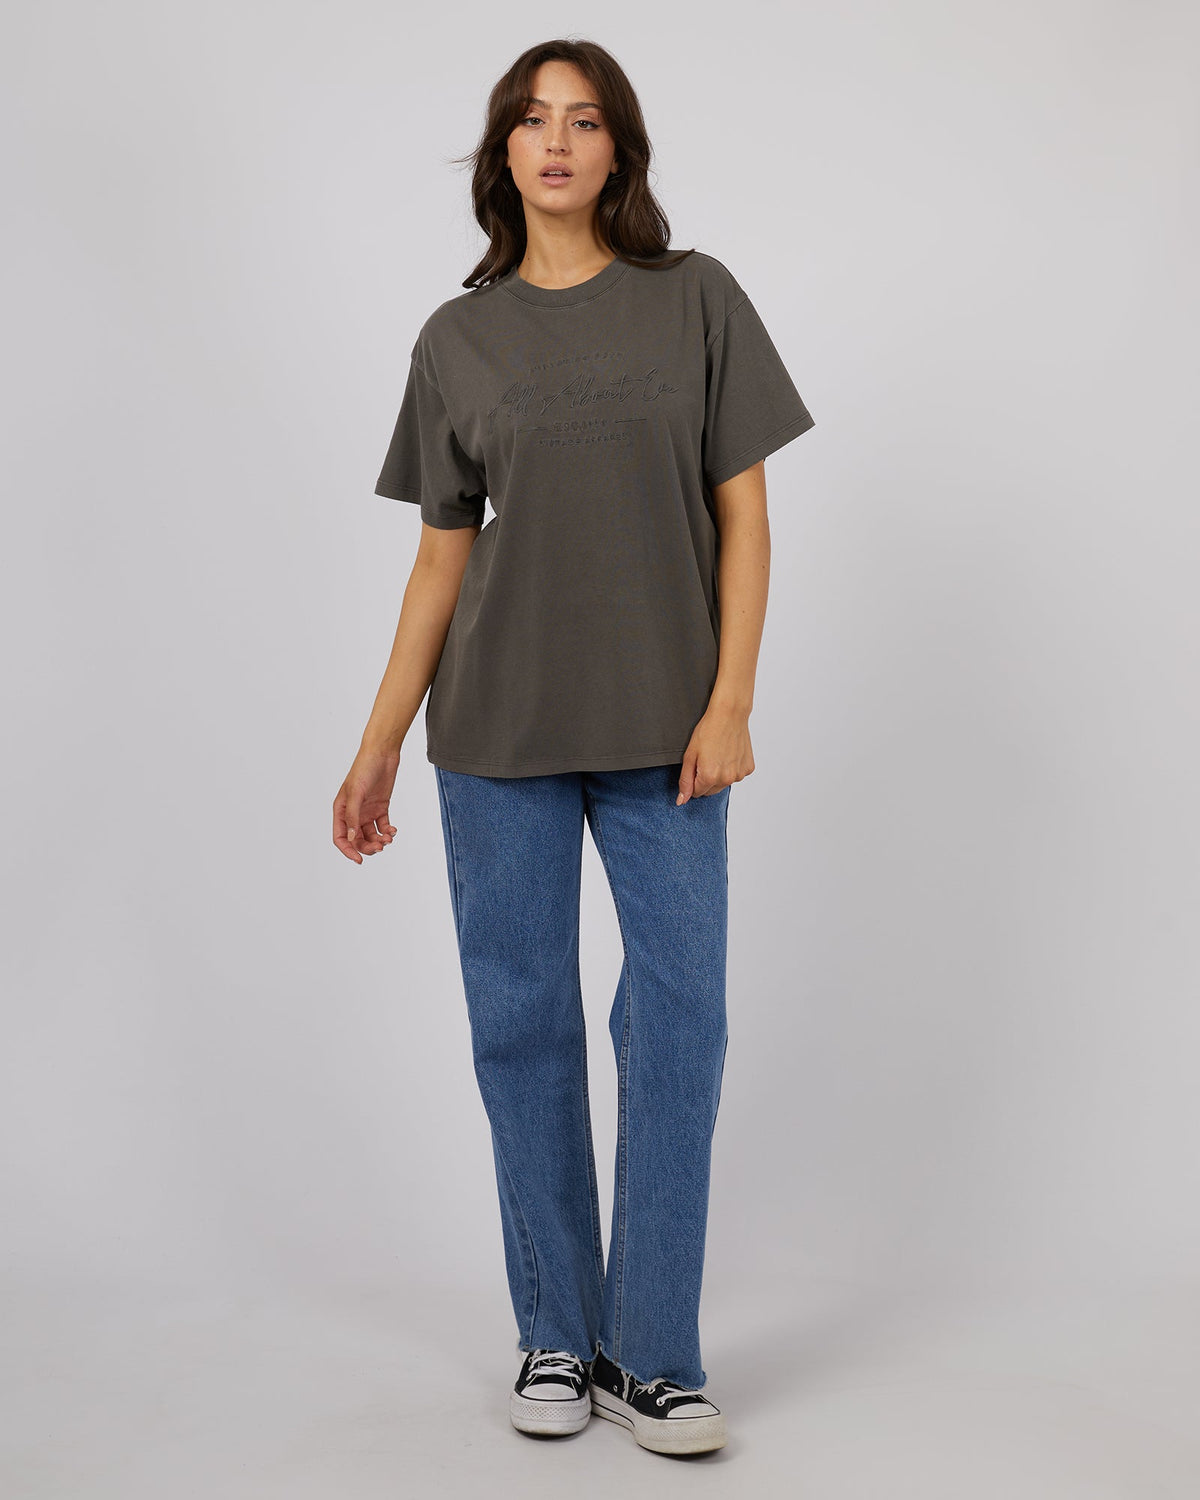 All About Eve-Classic Tee Charcoal-Edge Clothing